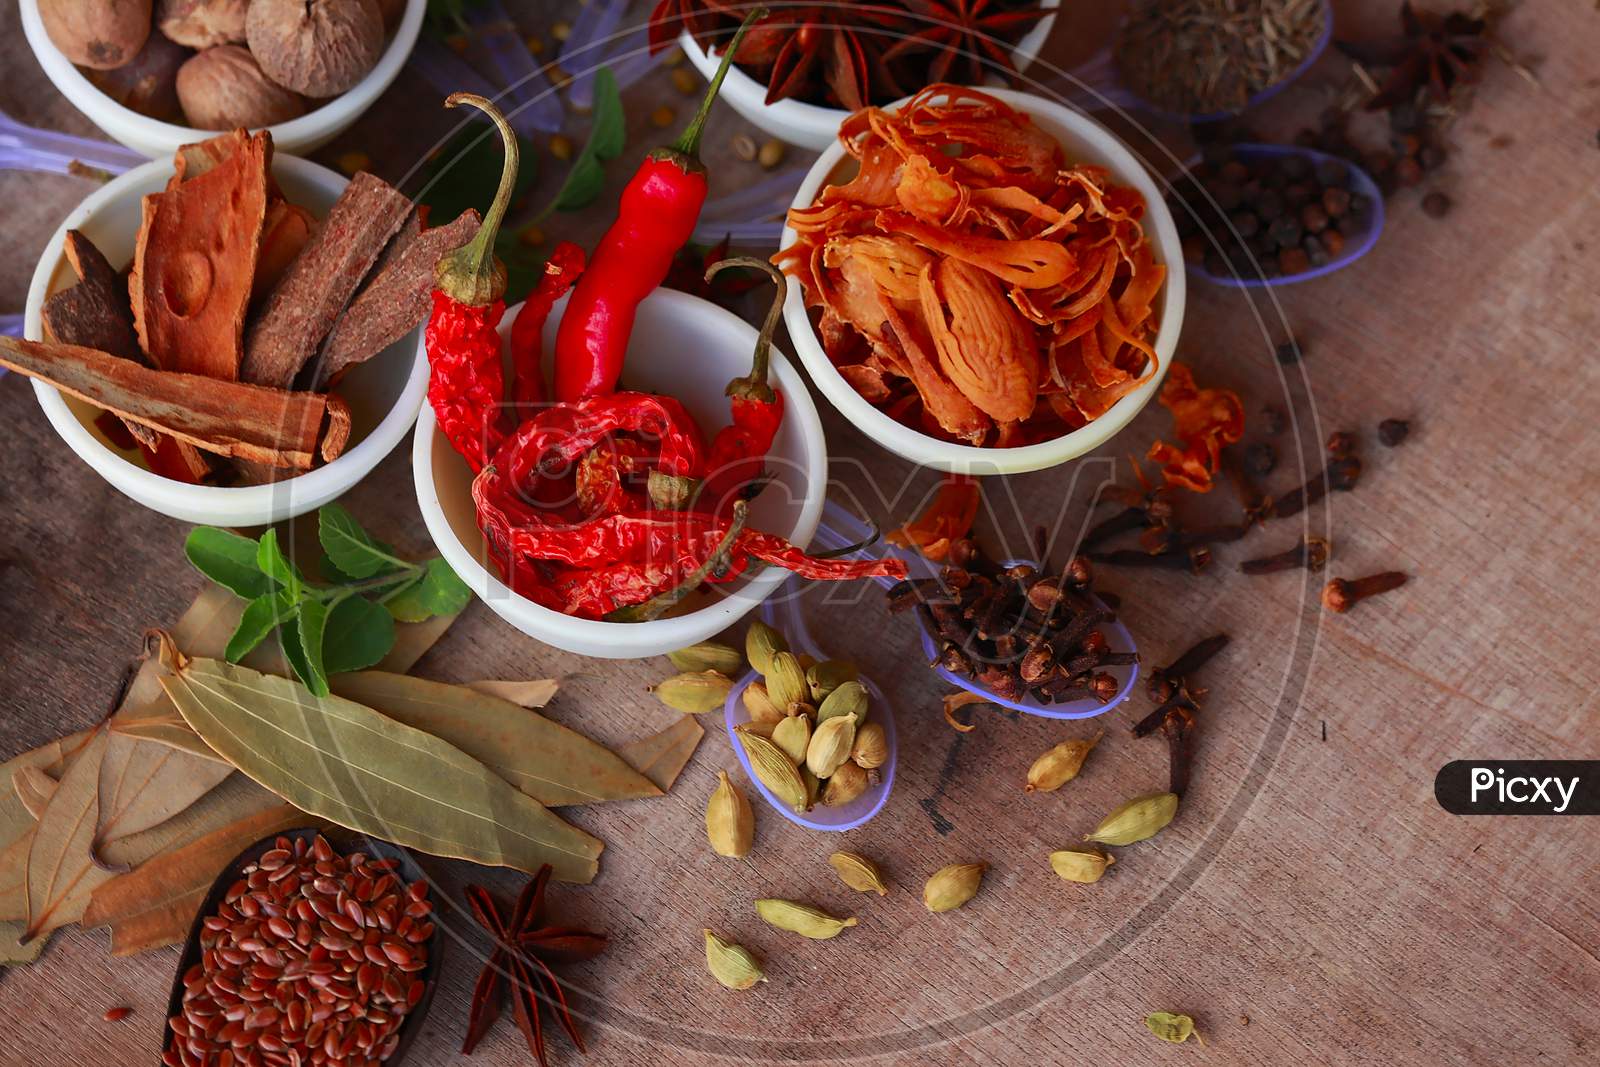 Spices And Herbs On Kitchen Or Wooden Table,Colorful Spices And Herbs For Cooking With Rotation Teblet, Jaiphal, Star Anise, Chakri Fool, Cardamom, Elaichi, Saunf,Background Rotating,